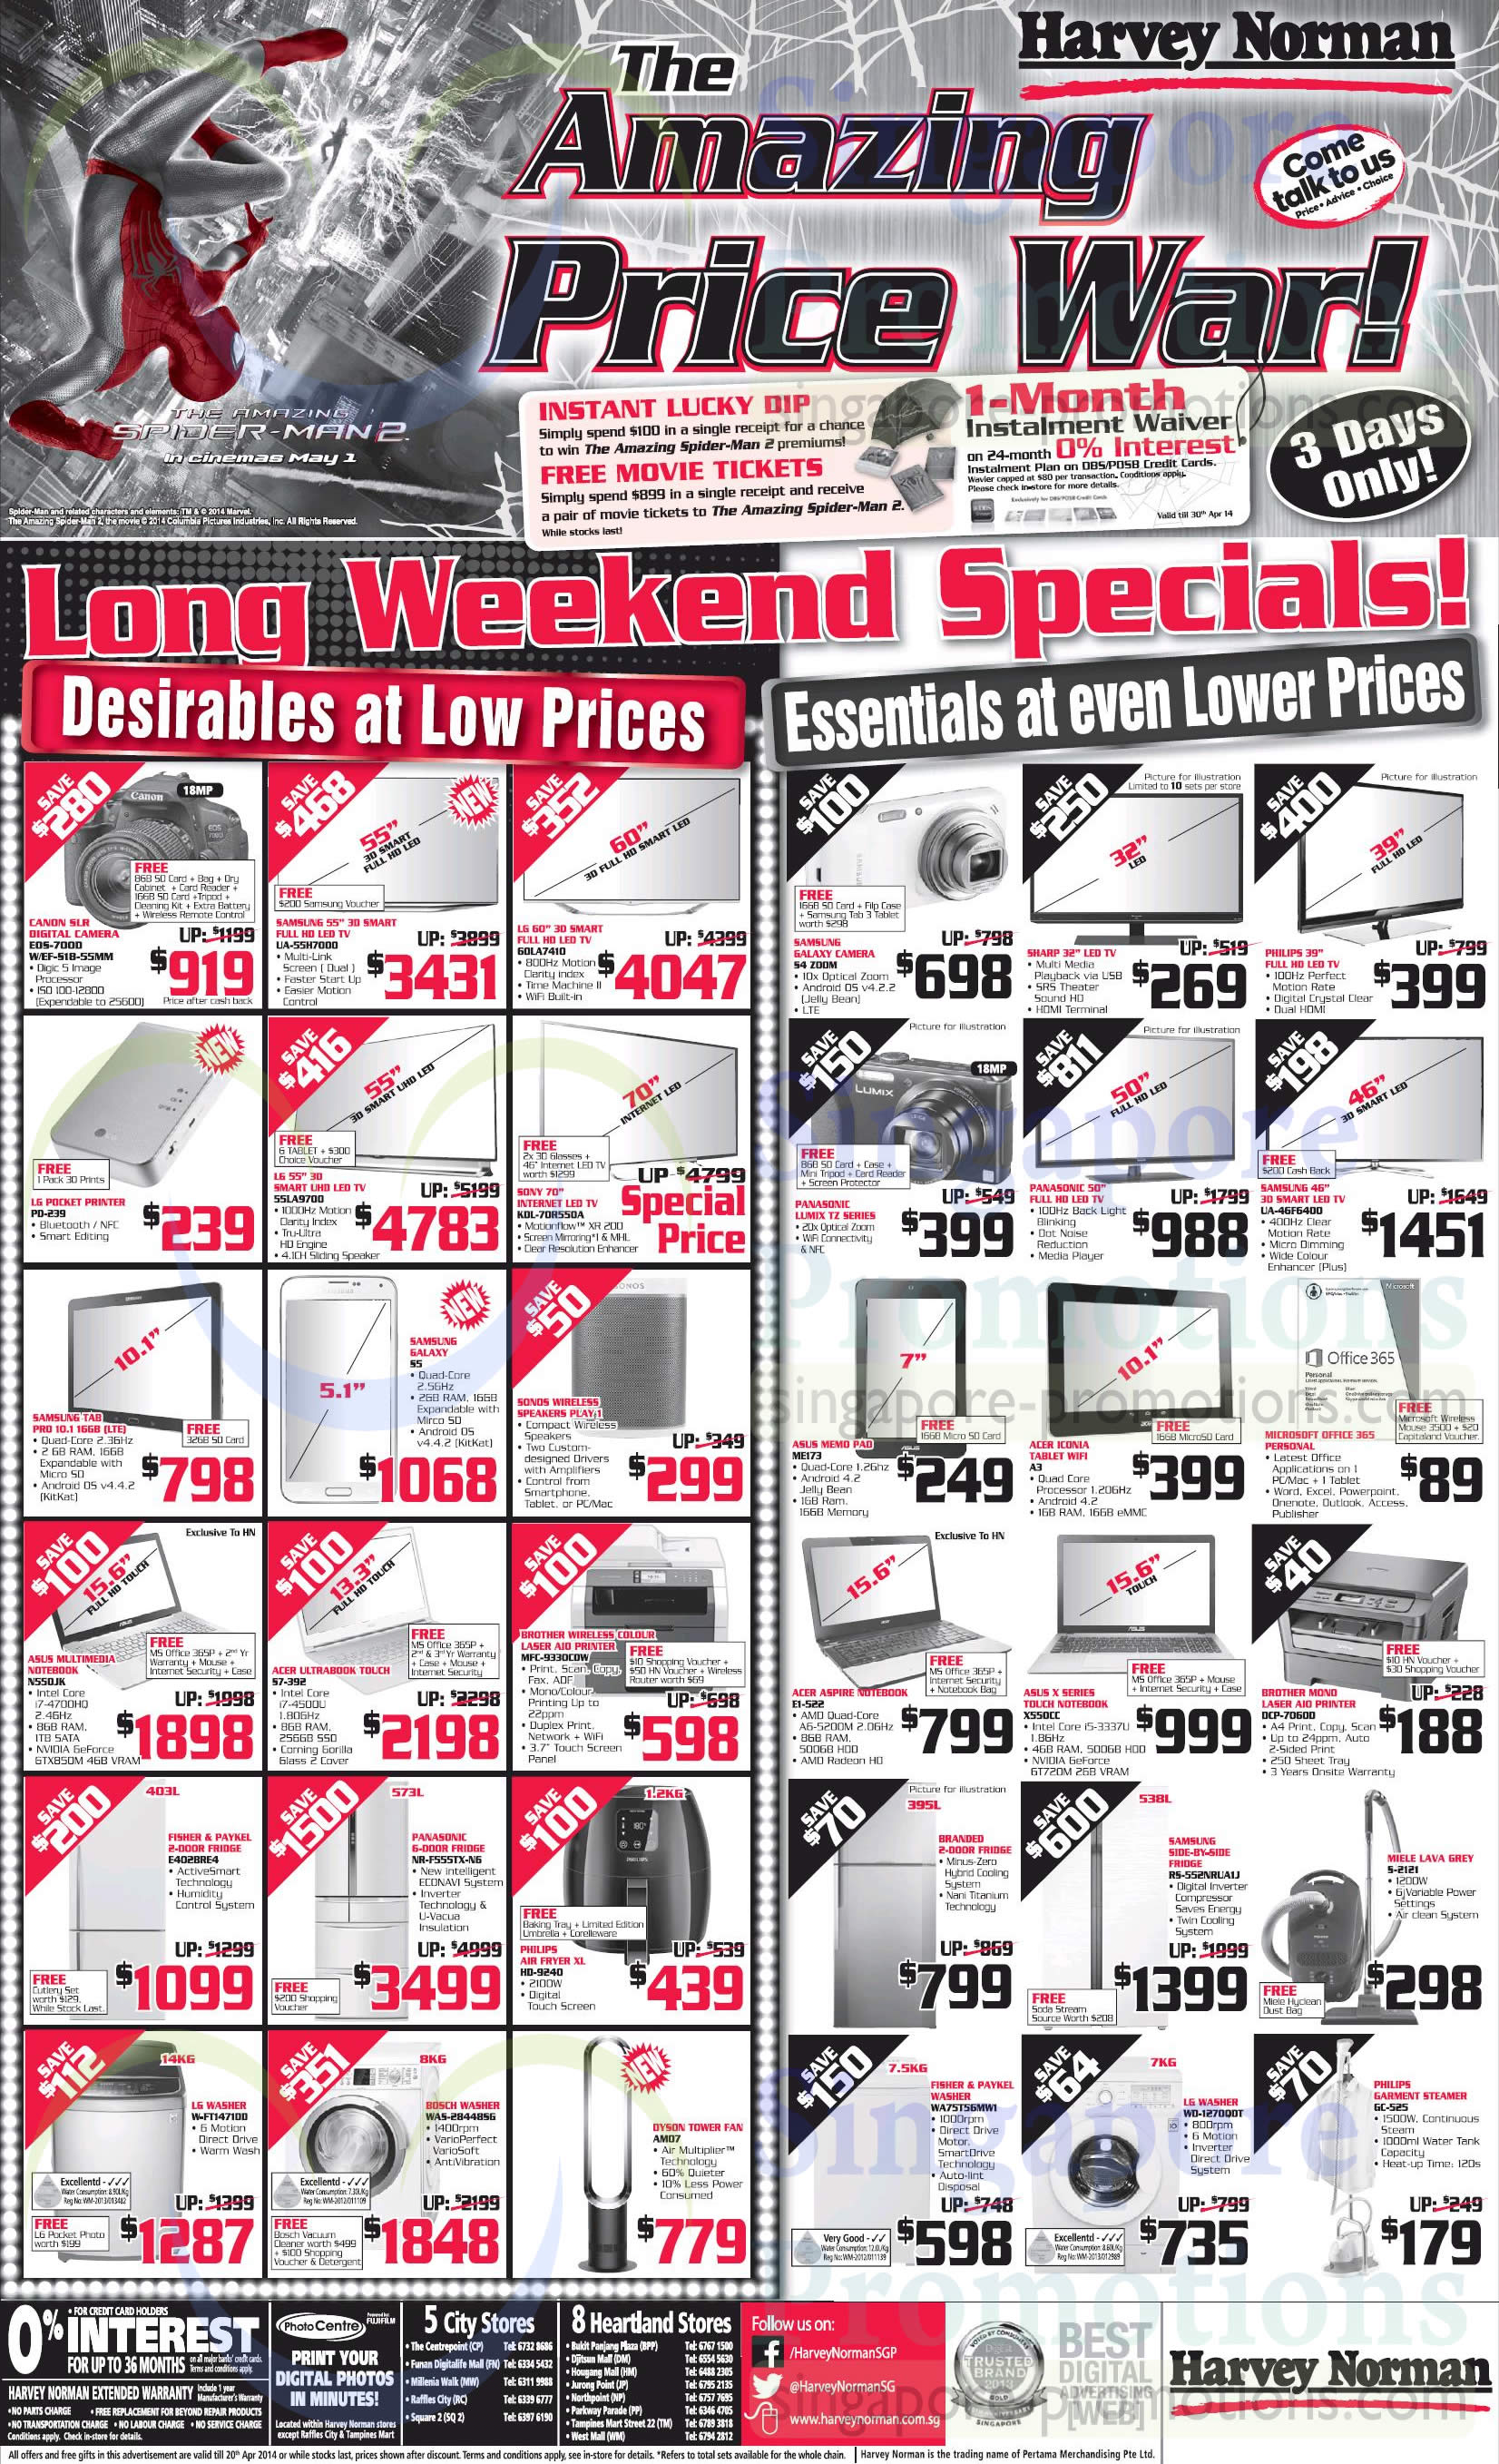 Featured image for Harvey Norman TVs, Notebooks, IT Gadgets & Appliances Offers 18 - 20 Apr 2014